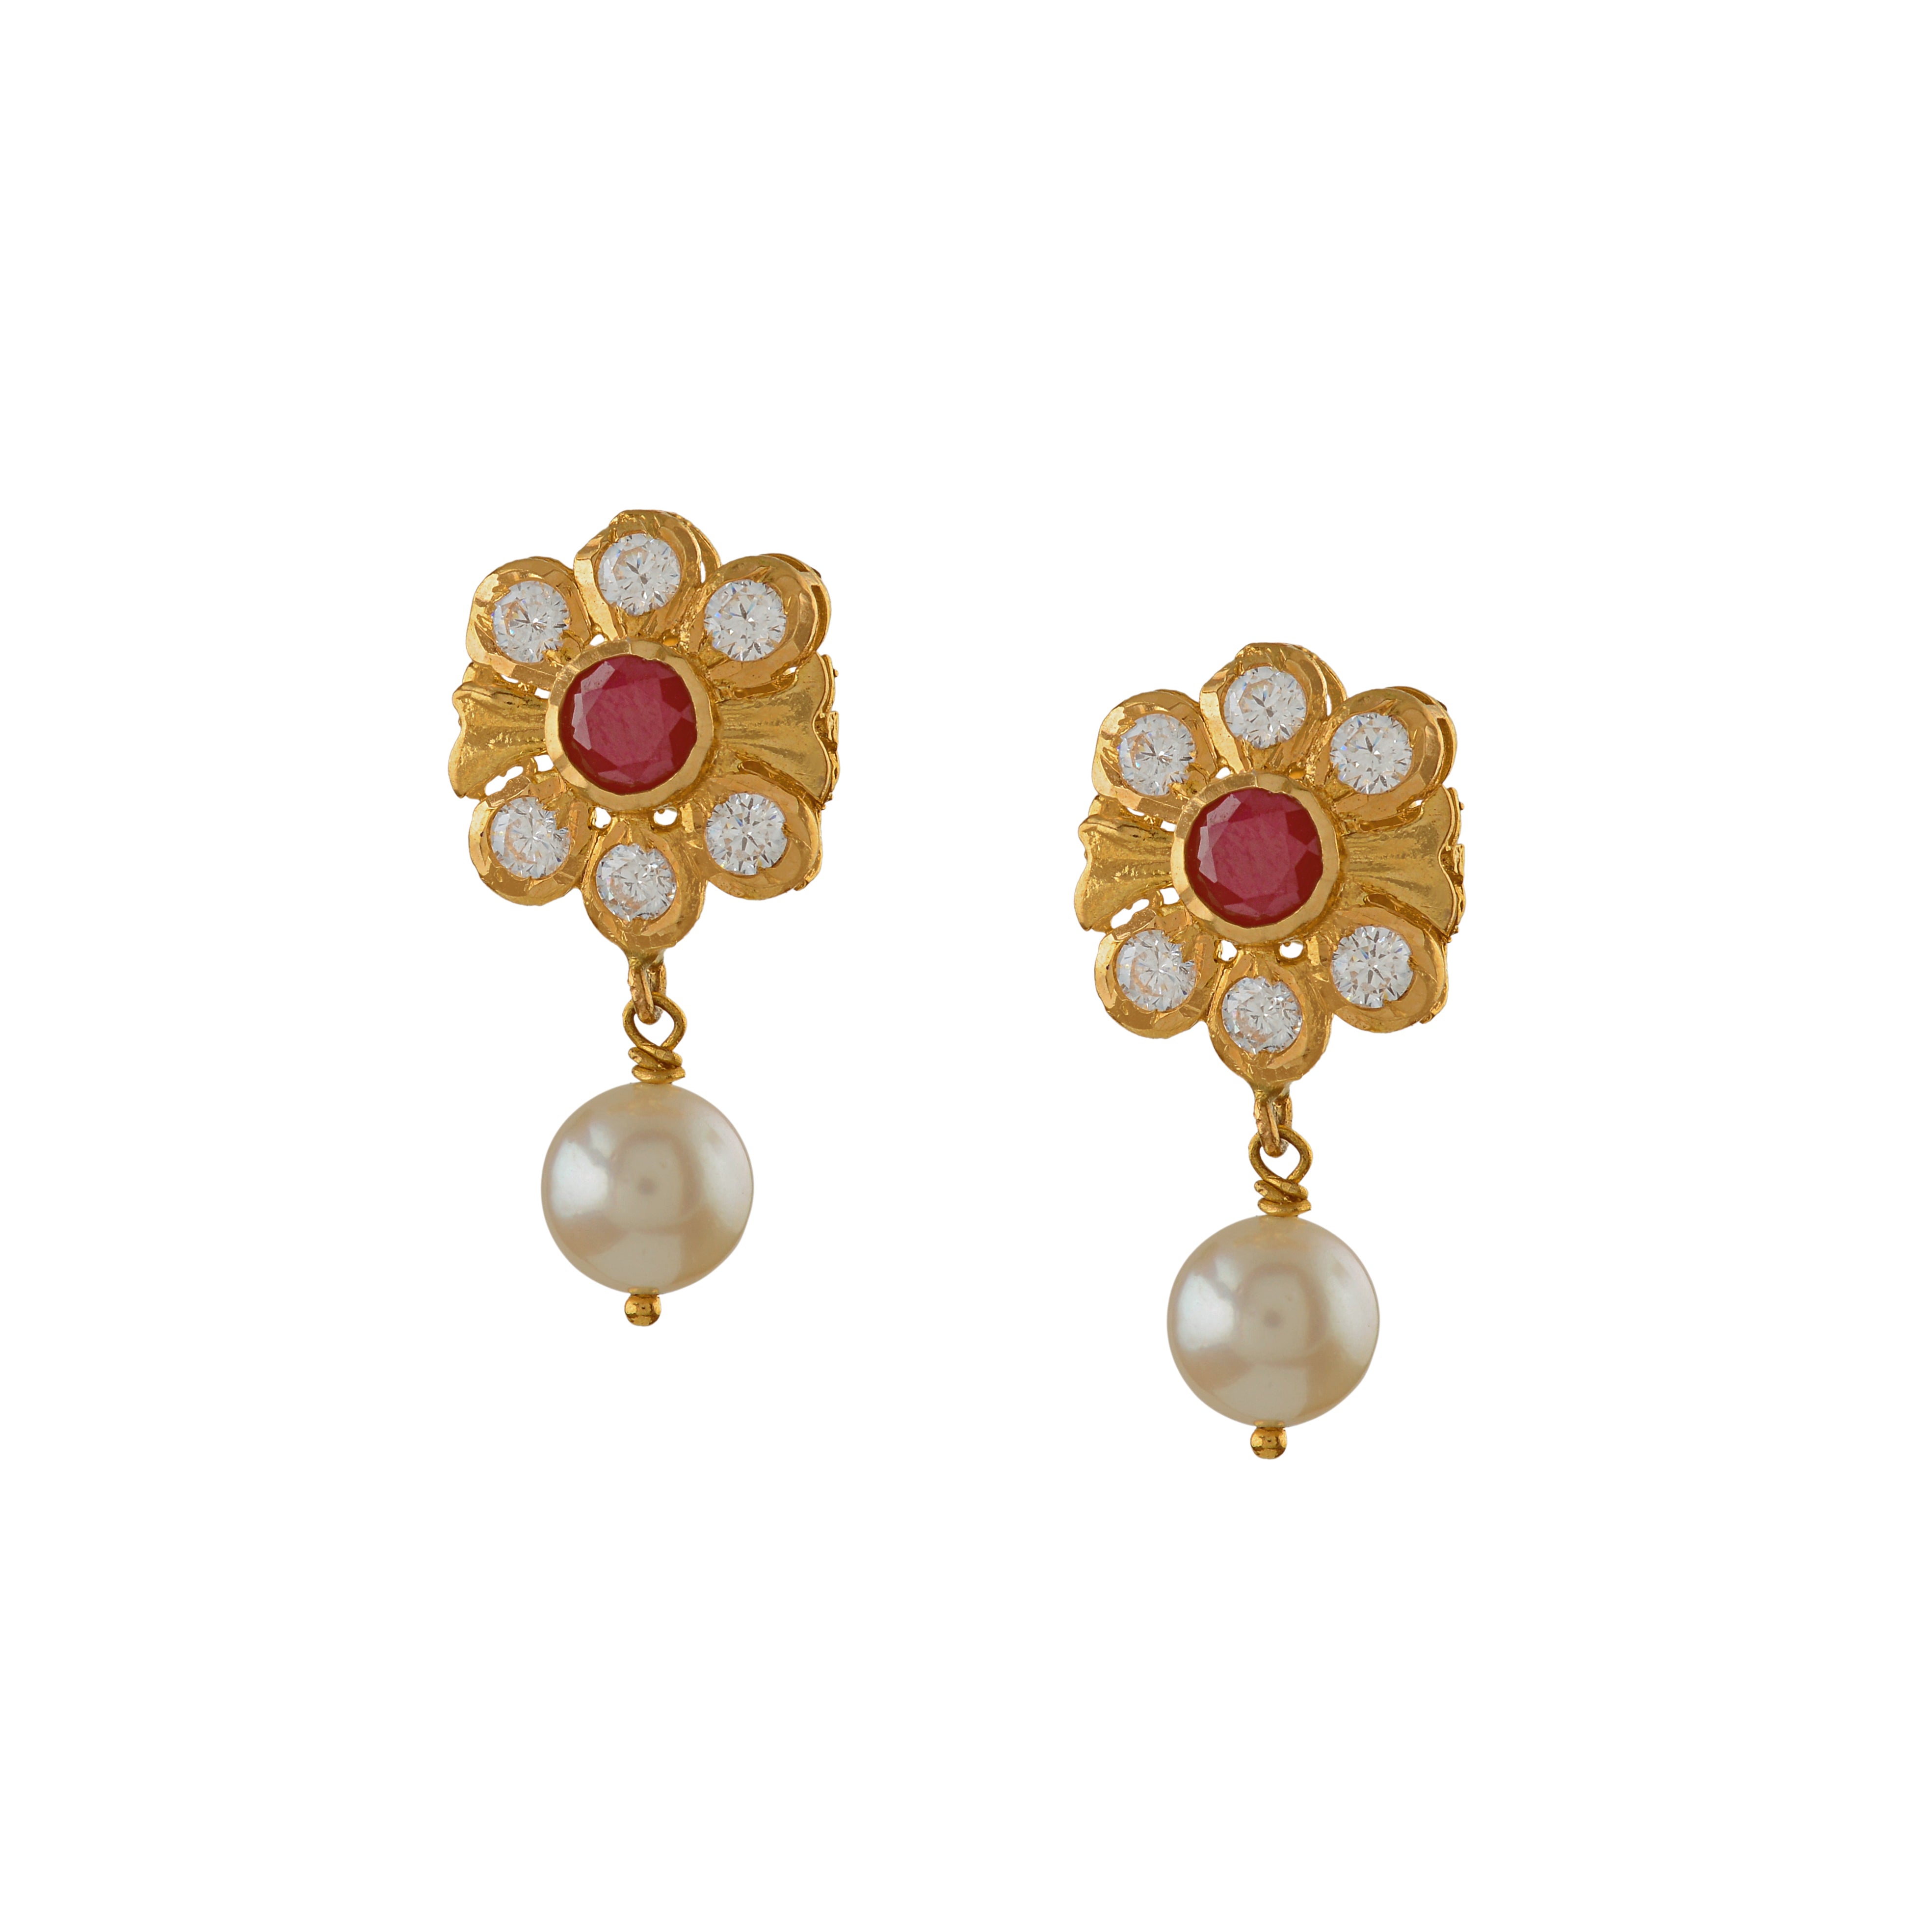 Floral Diamond Earrings With Pearl Drops